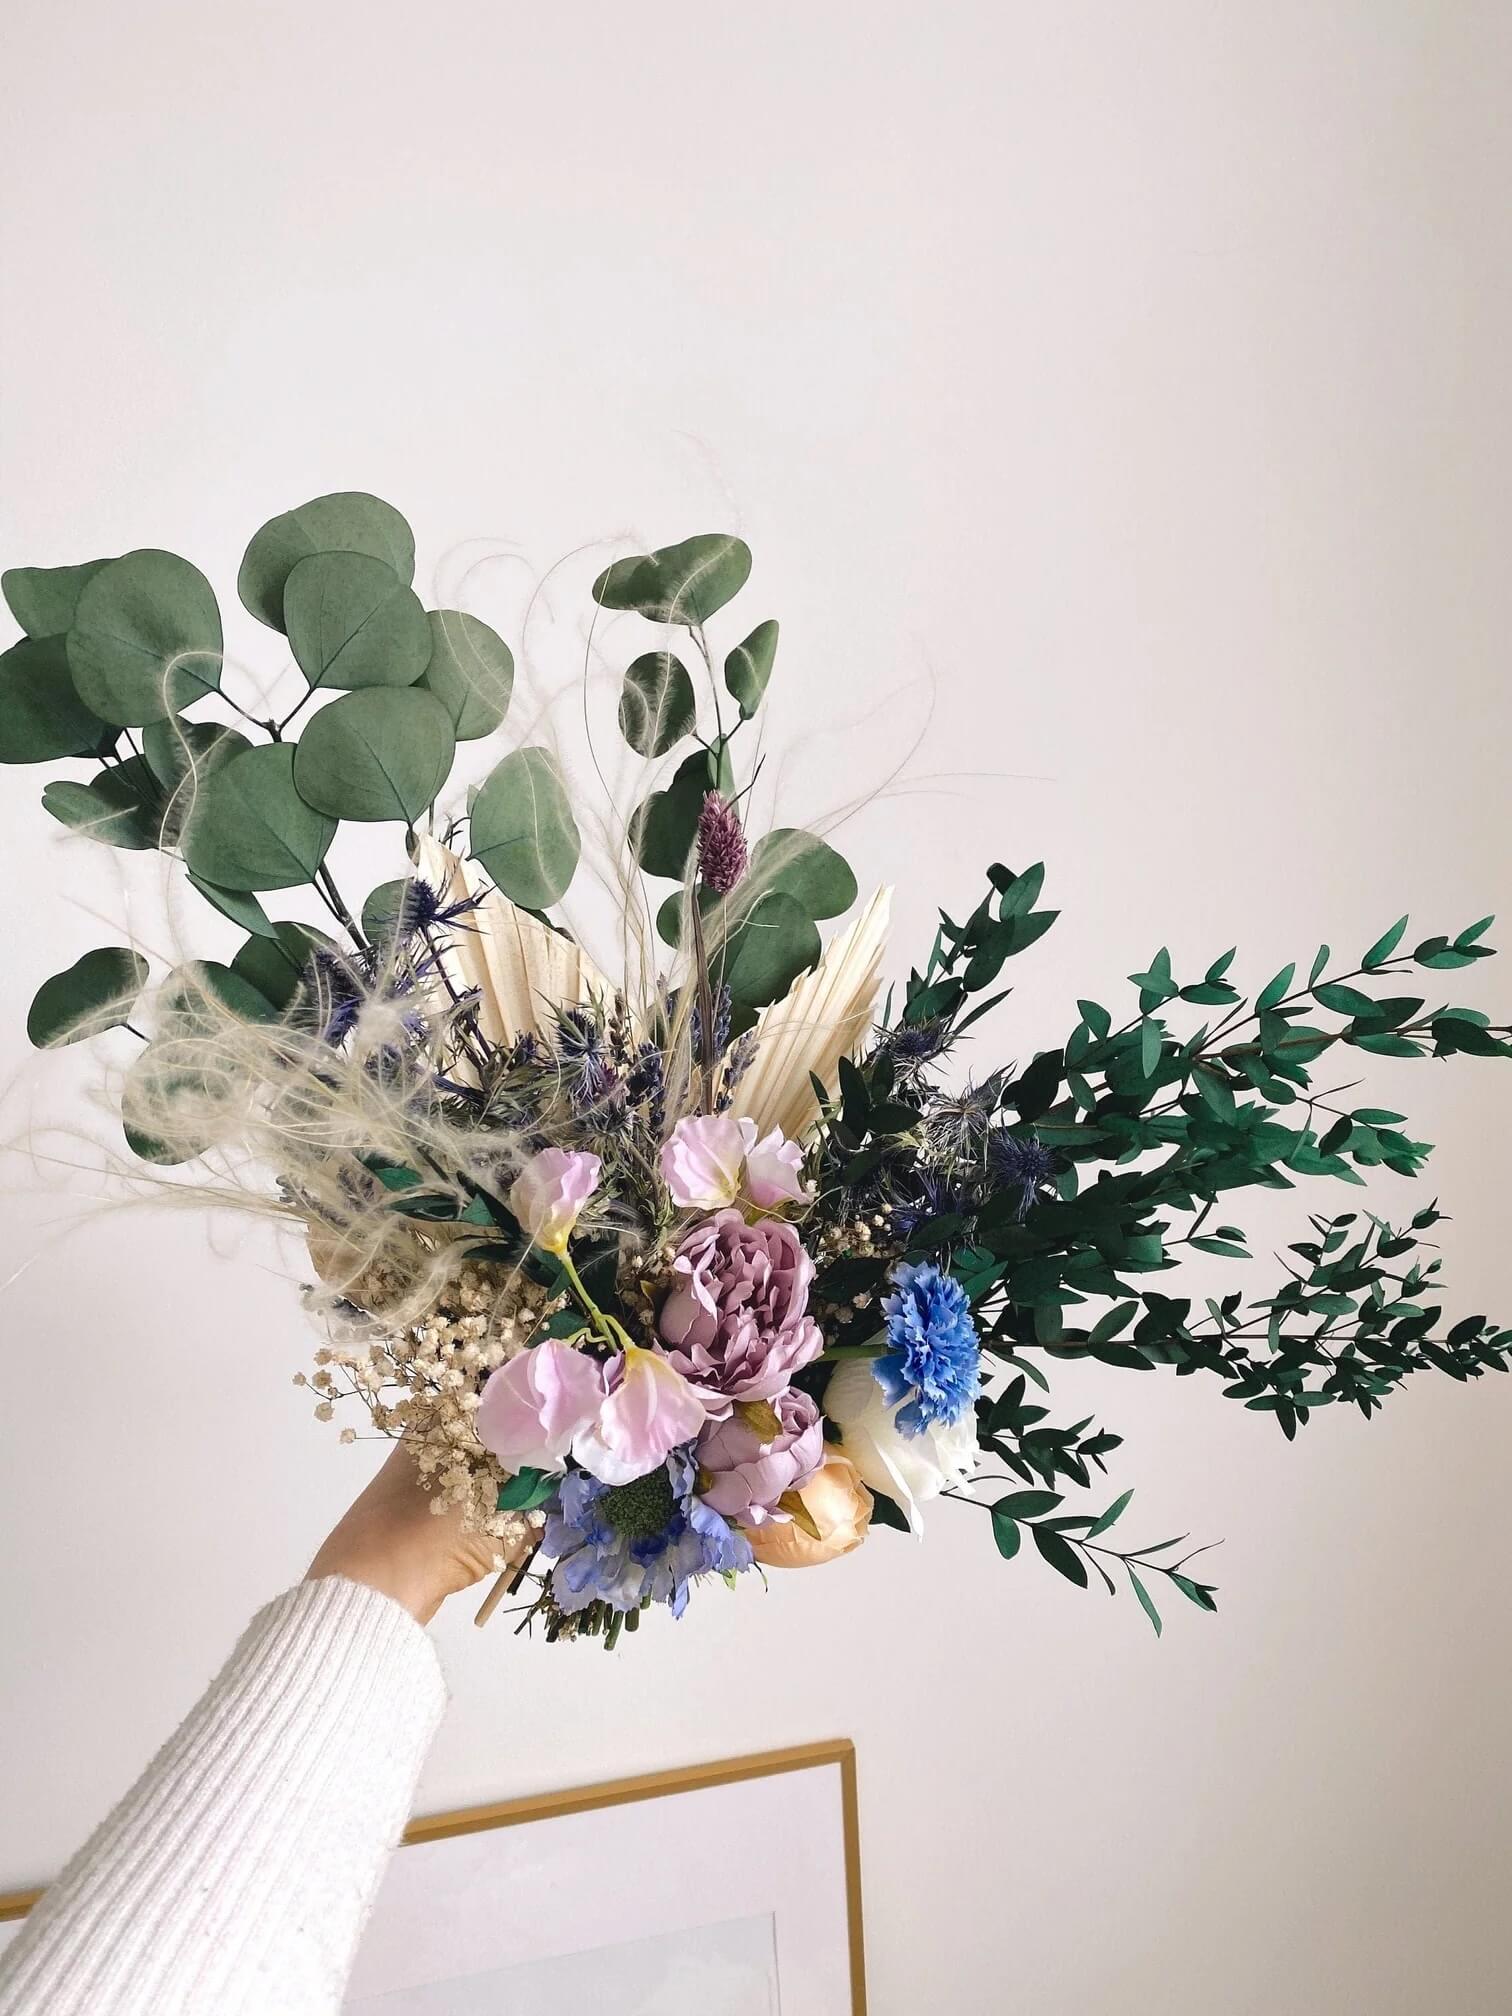 Pastel lilac and dried greenery vintage wedding flowers with sweet peas by Hidden Botanics.